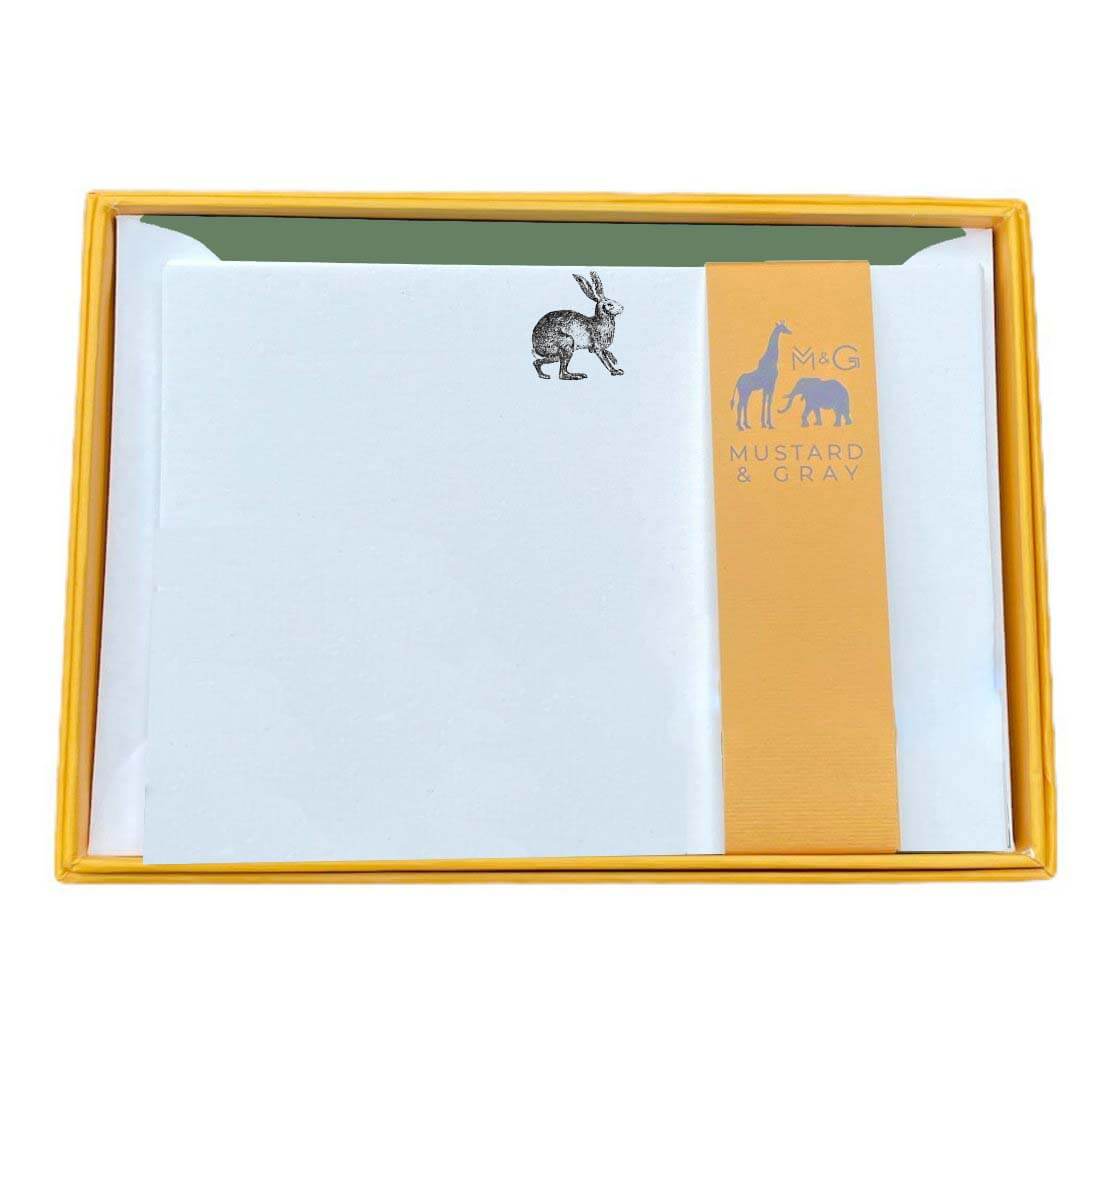 Hare Notecard Set with Lined Envelopes